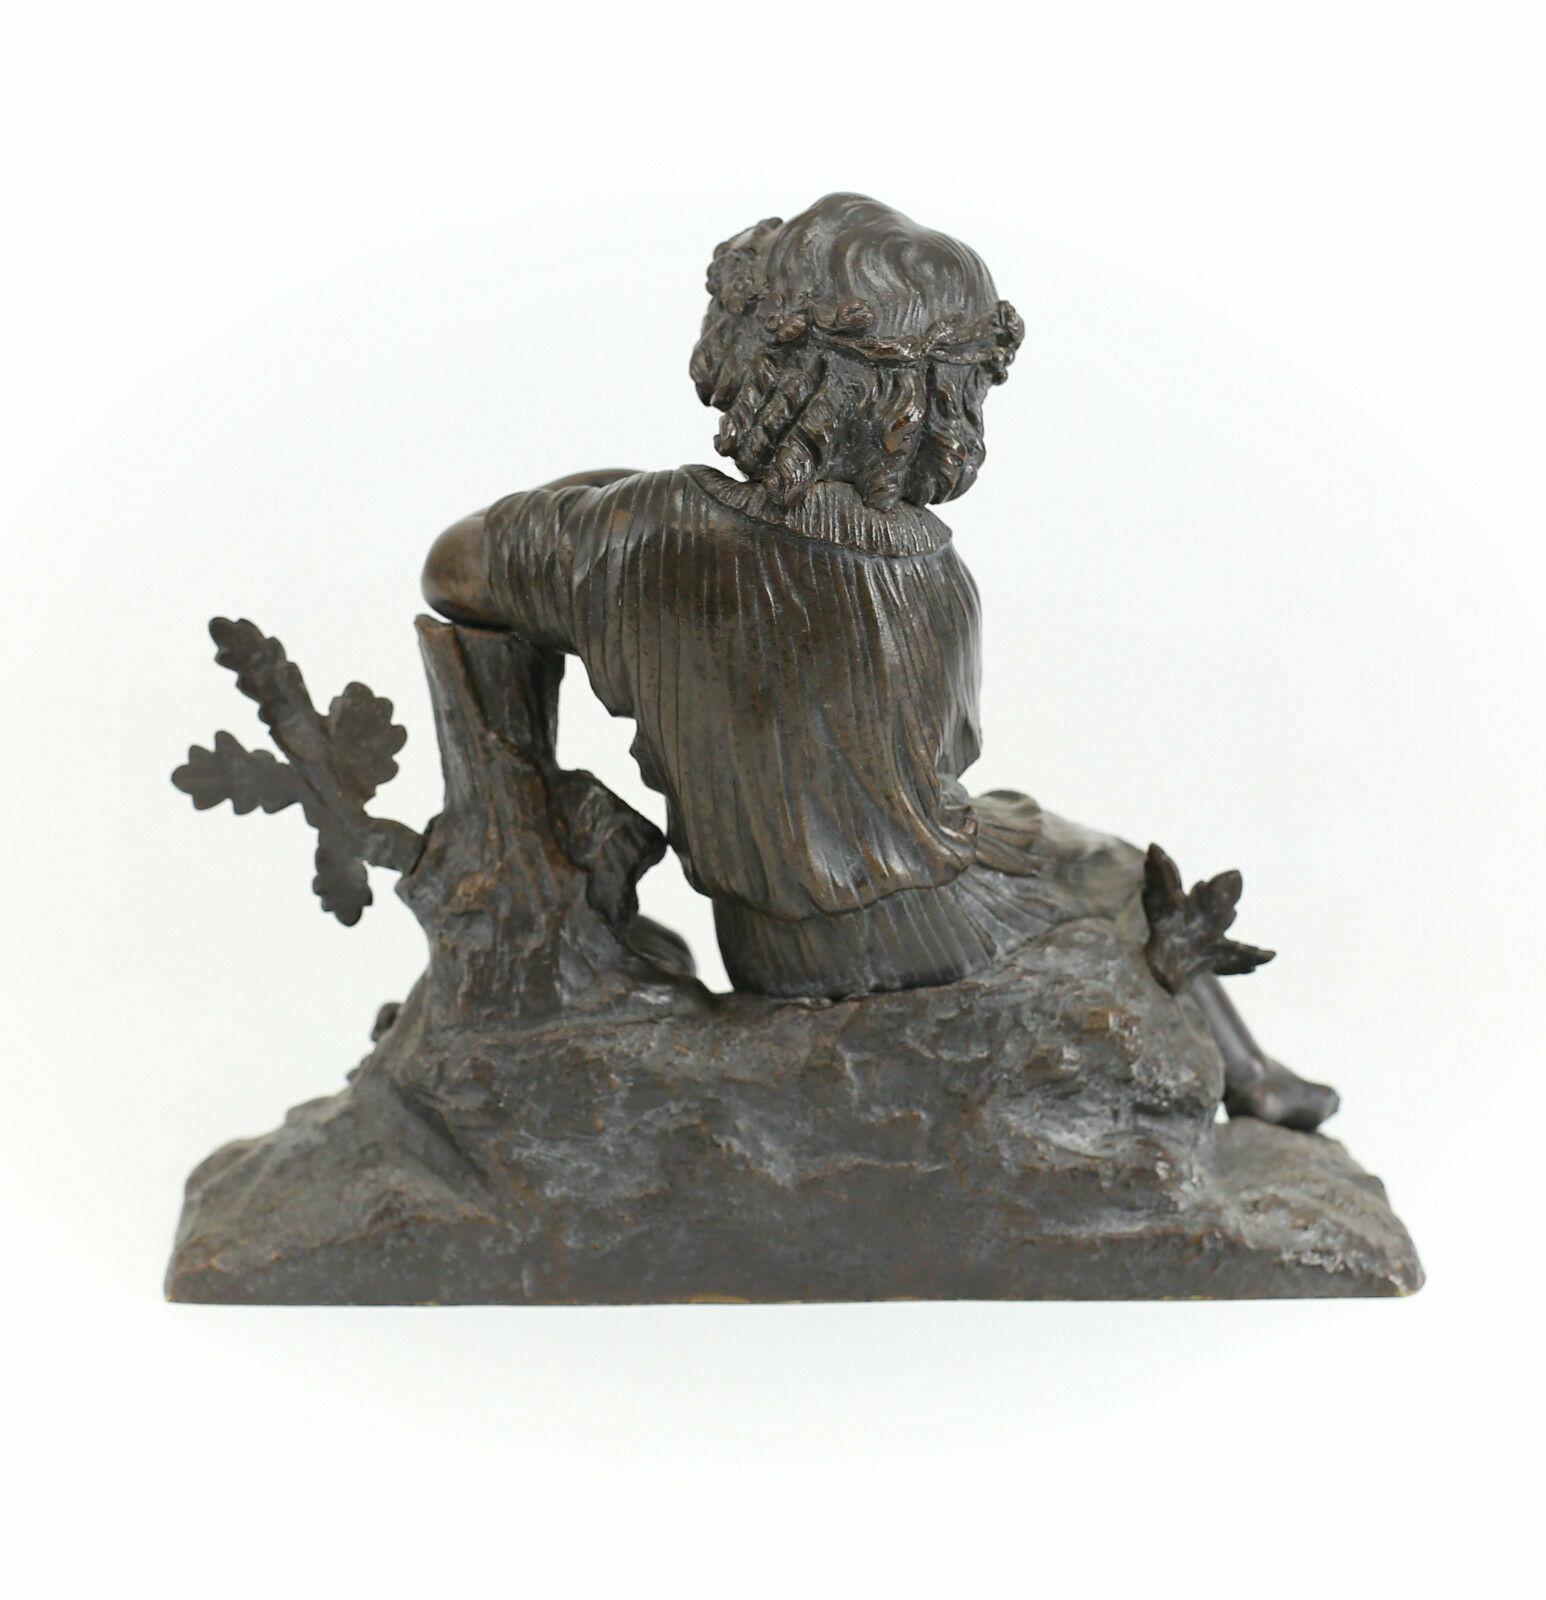 European Patinated Bronze Figurative Sculpture Girl with Bird Egg & Nest, 19th Century For Sale